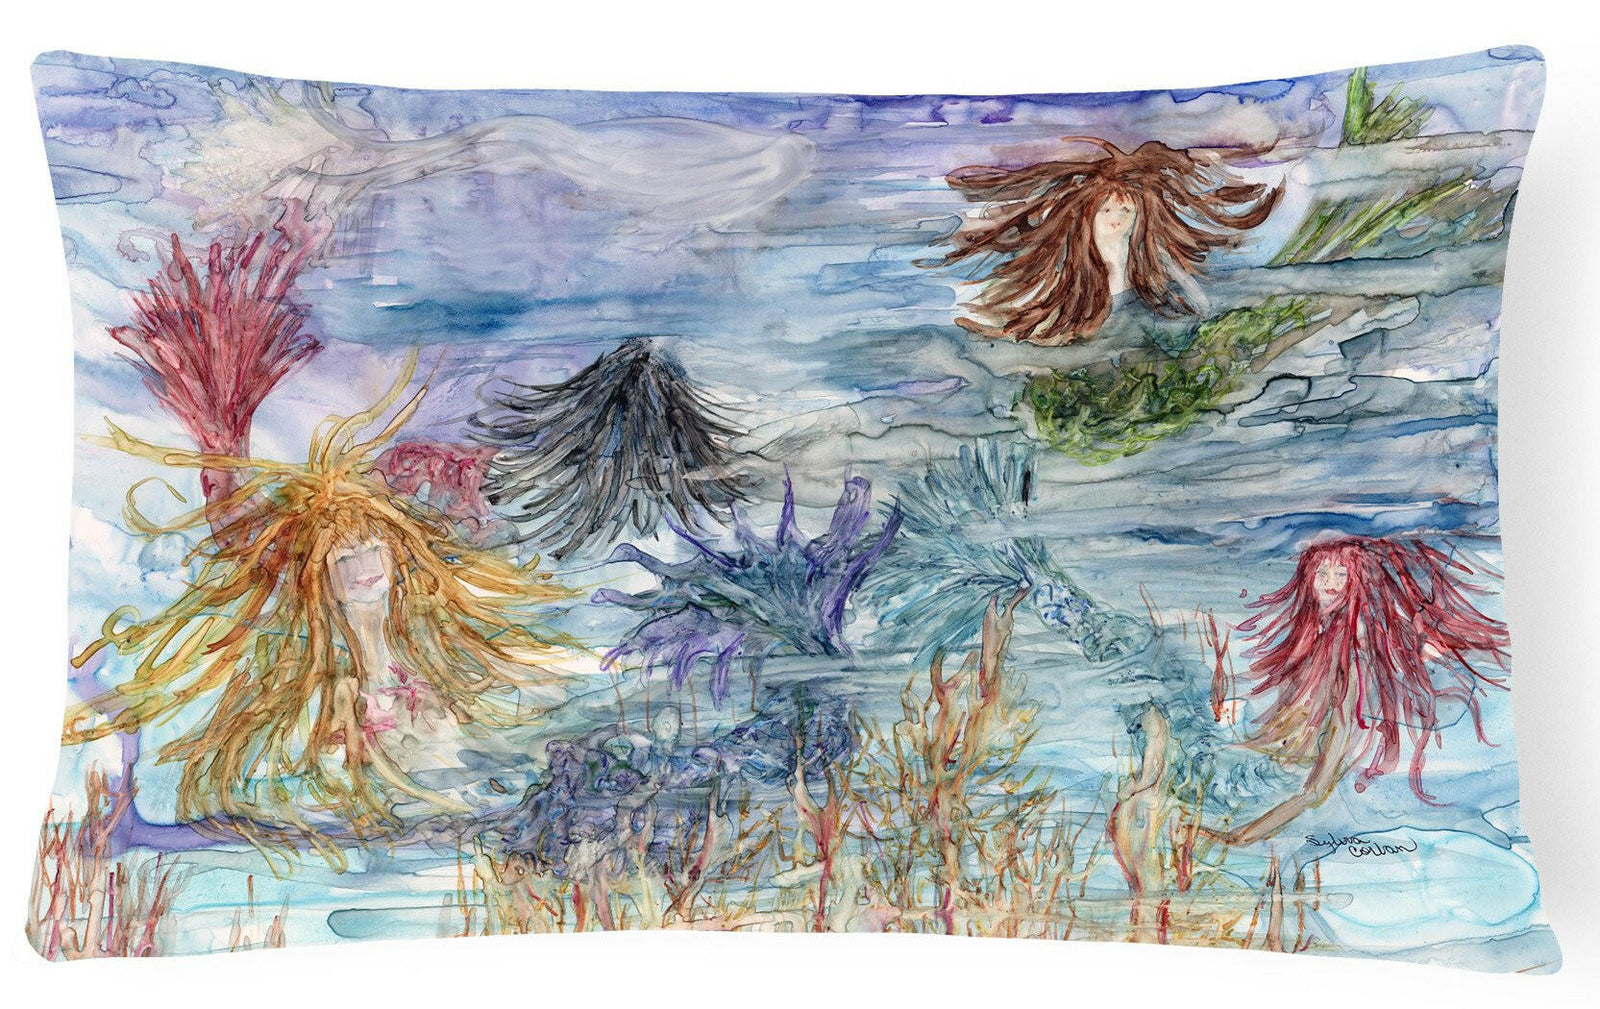 Abstract Mermaid Water Fantasy Fabric Decorative Pillow 8975PW1216 by Caroline's Treasures